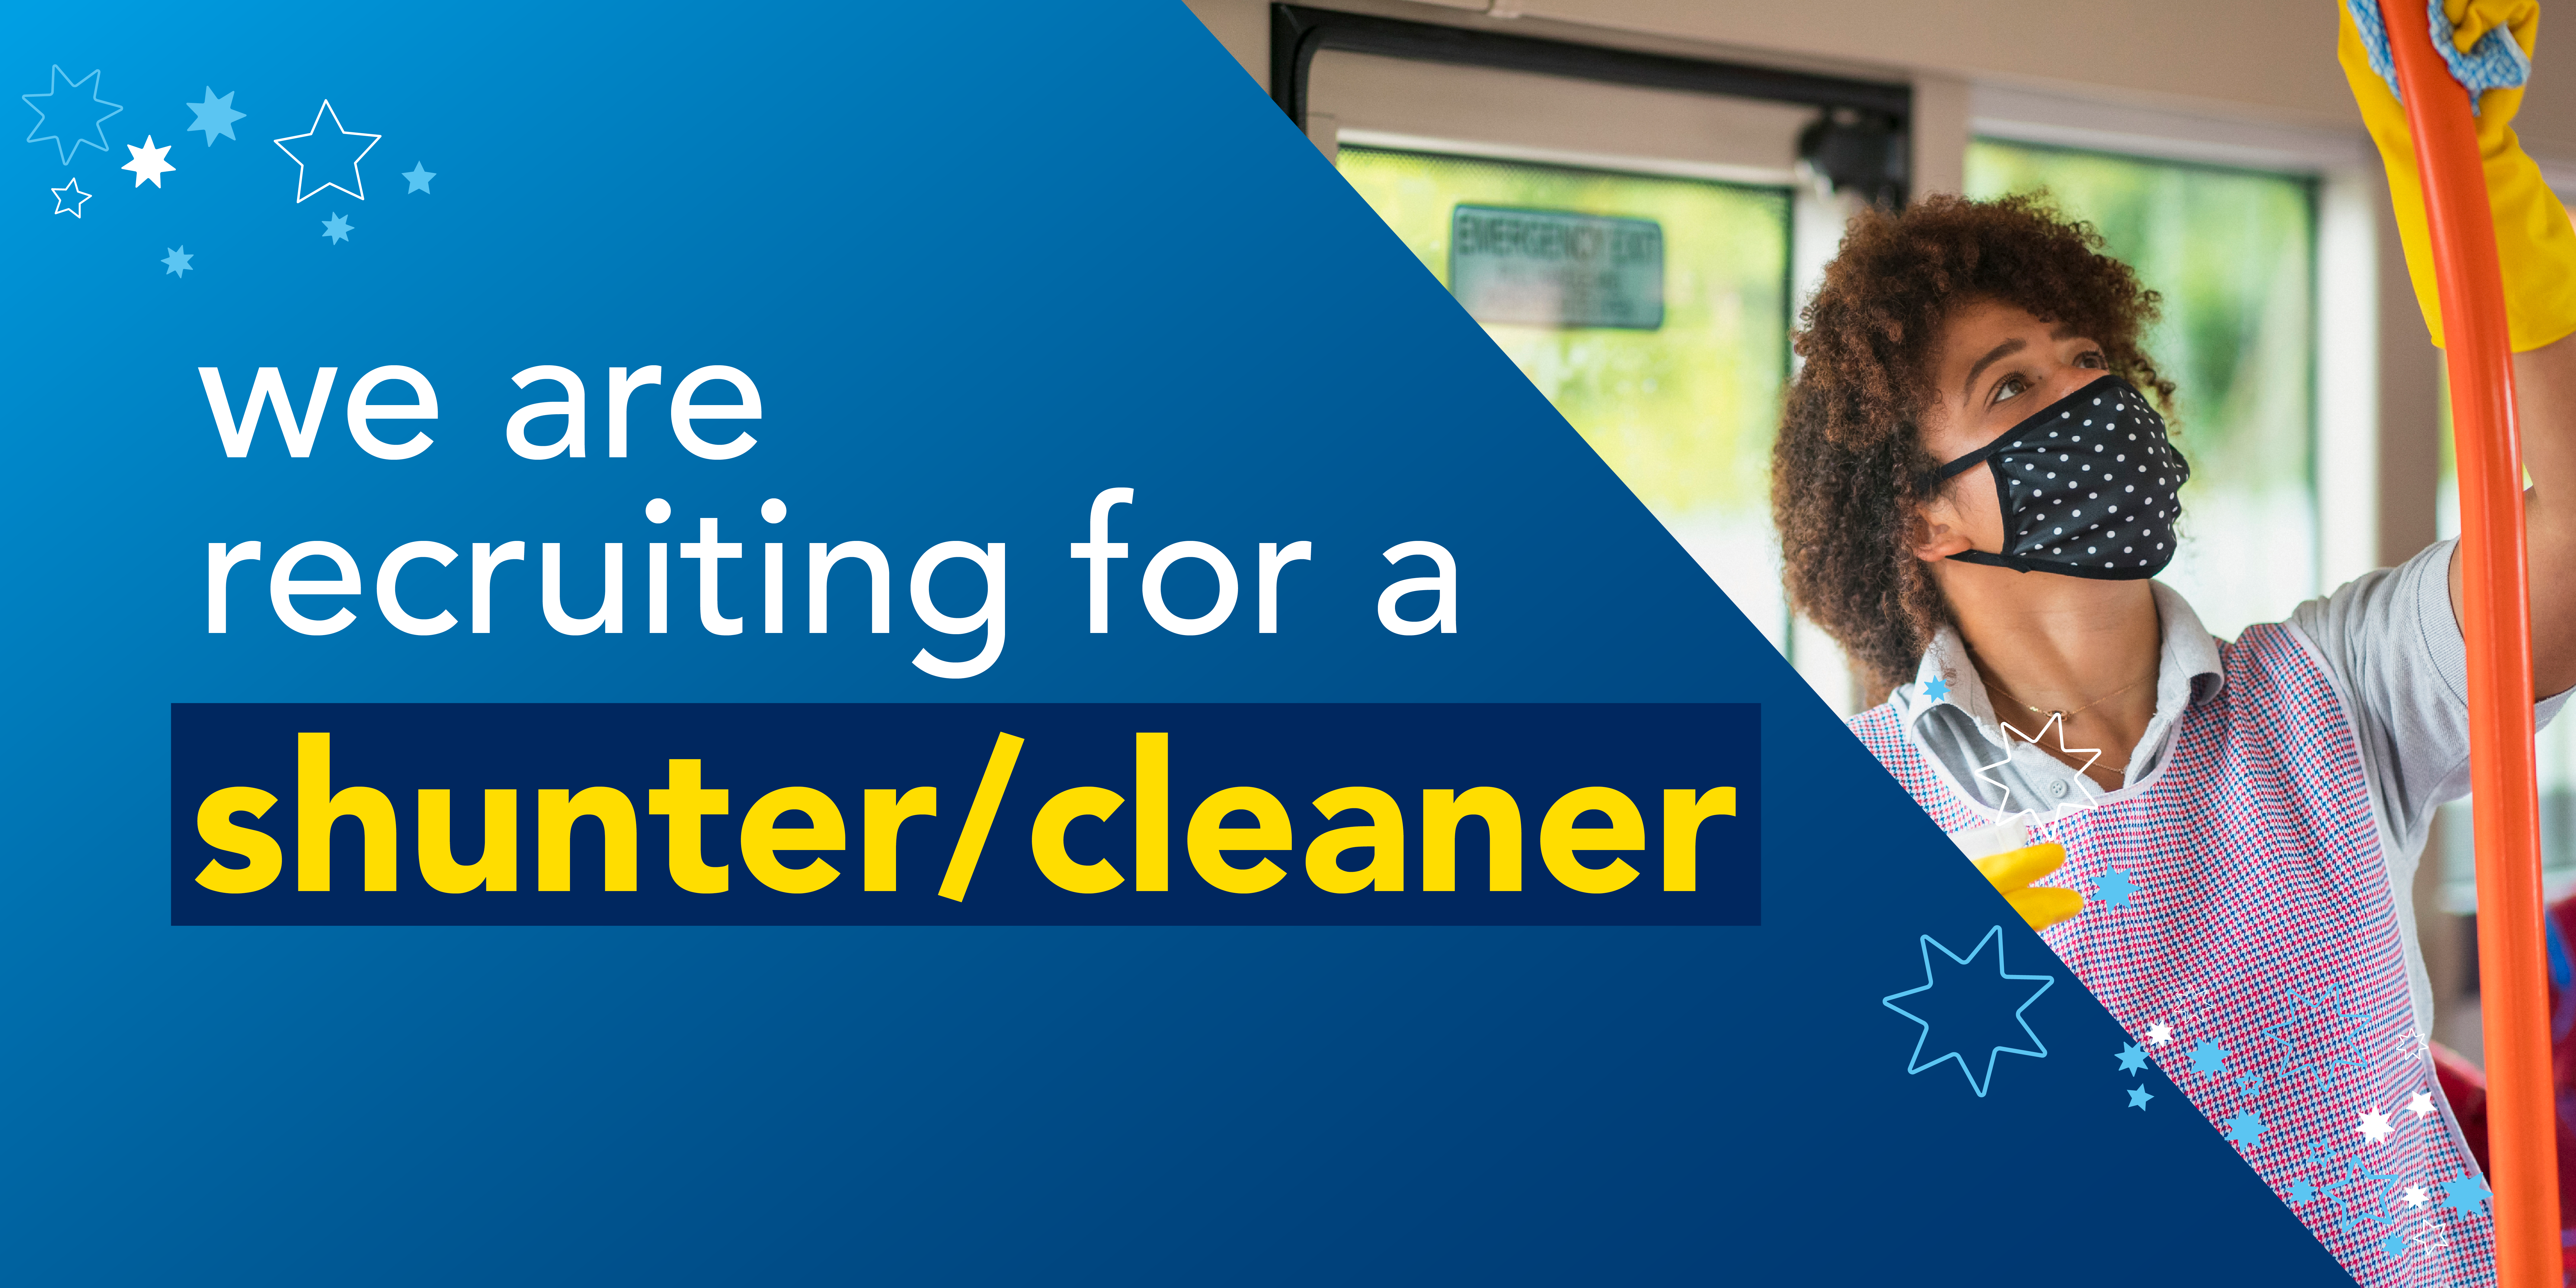 we are recruiting for a shunter/cleaner